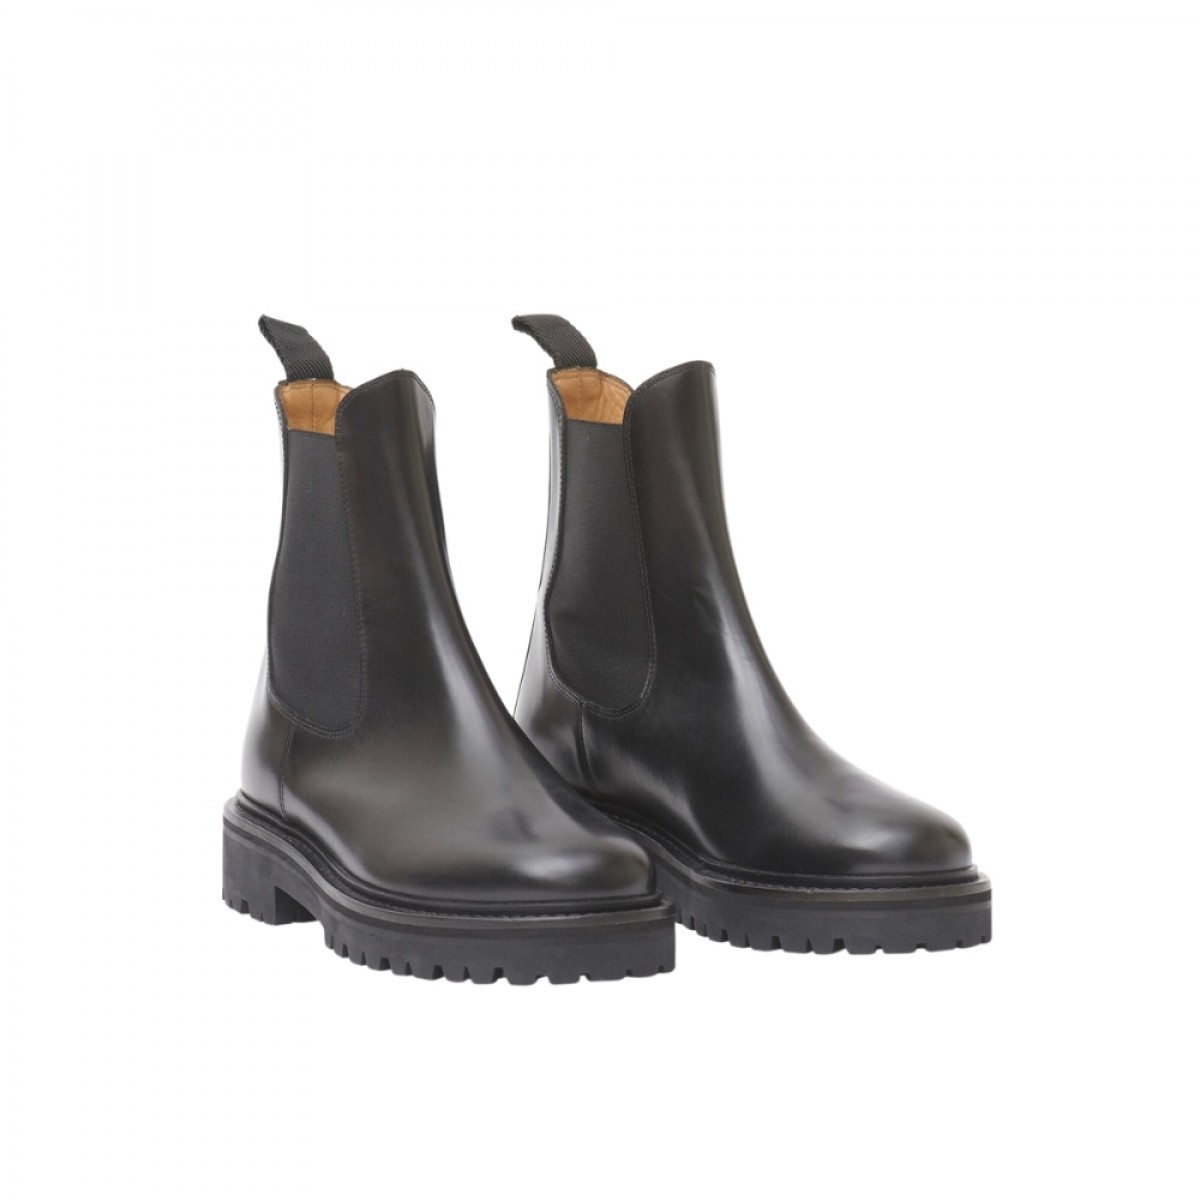 castay chelsea boots - black